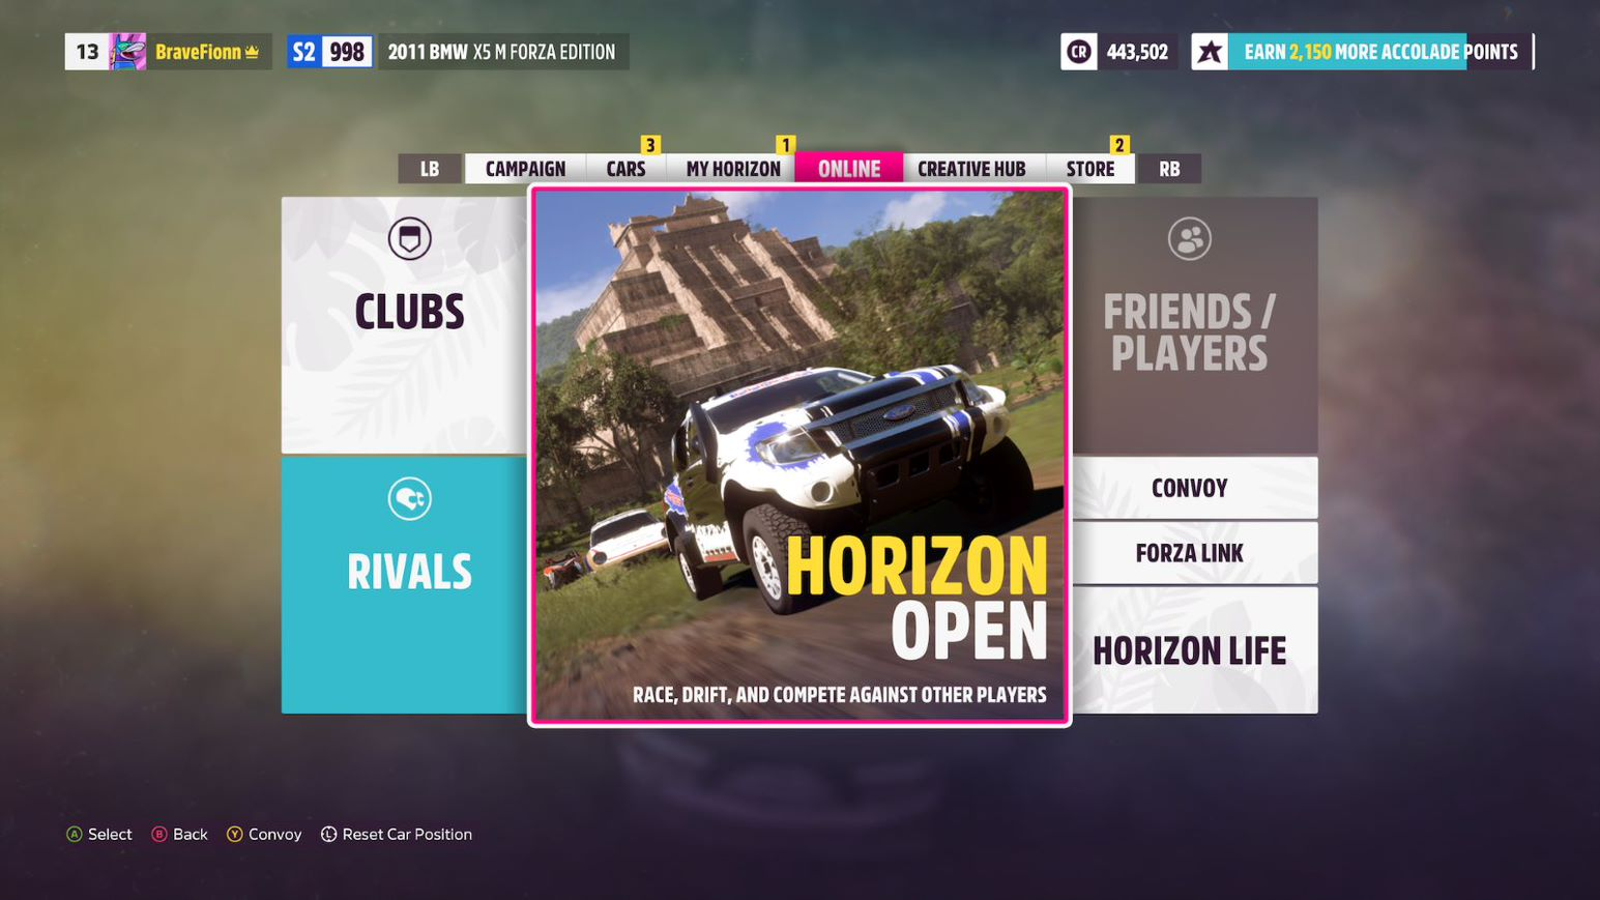 How to PLAY FORZA HORIZON 5 if You Own a PLAYSTATION 